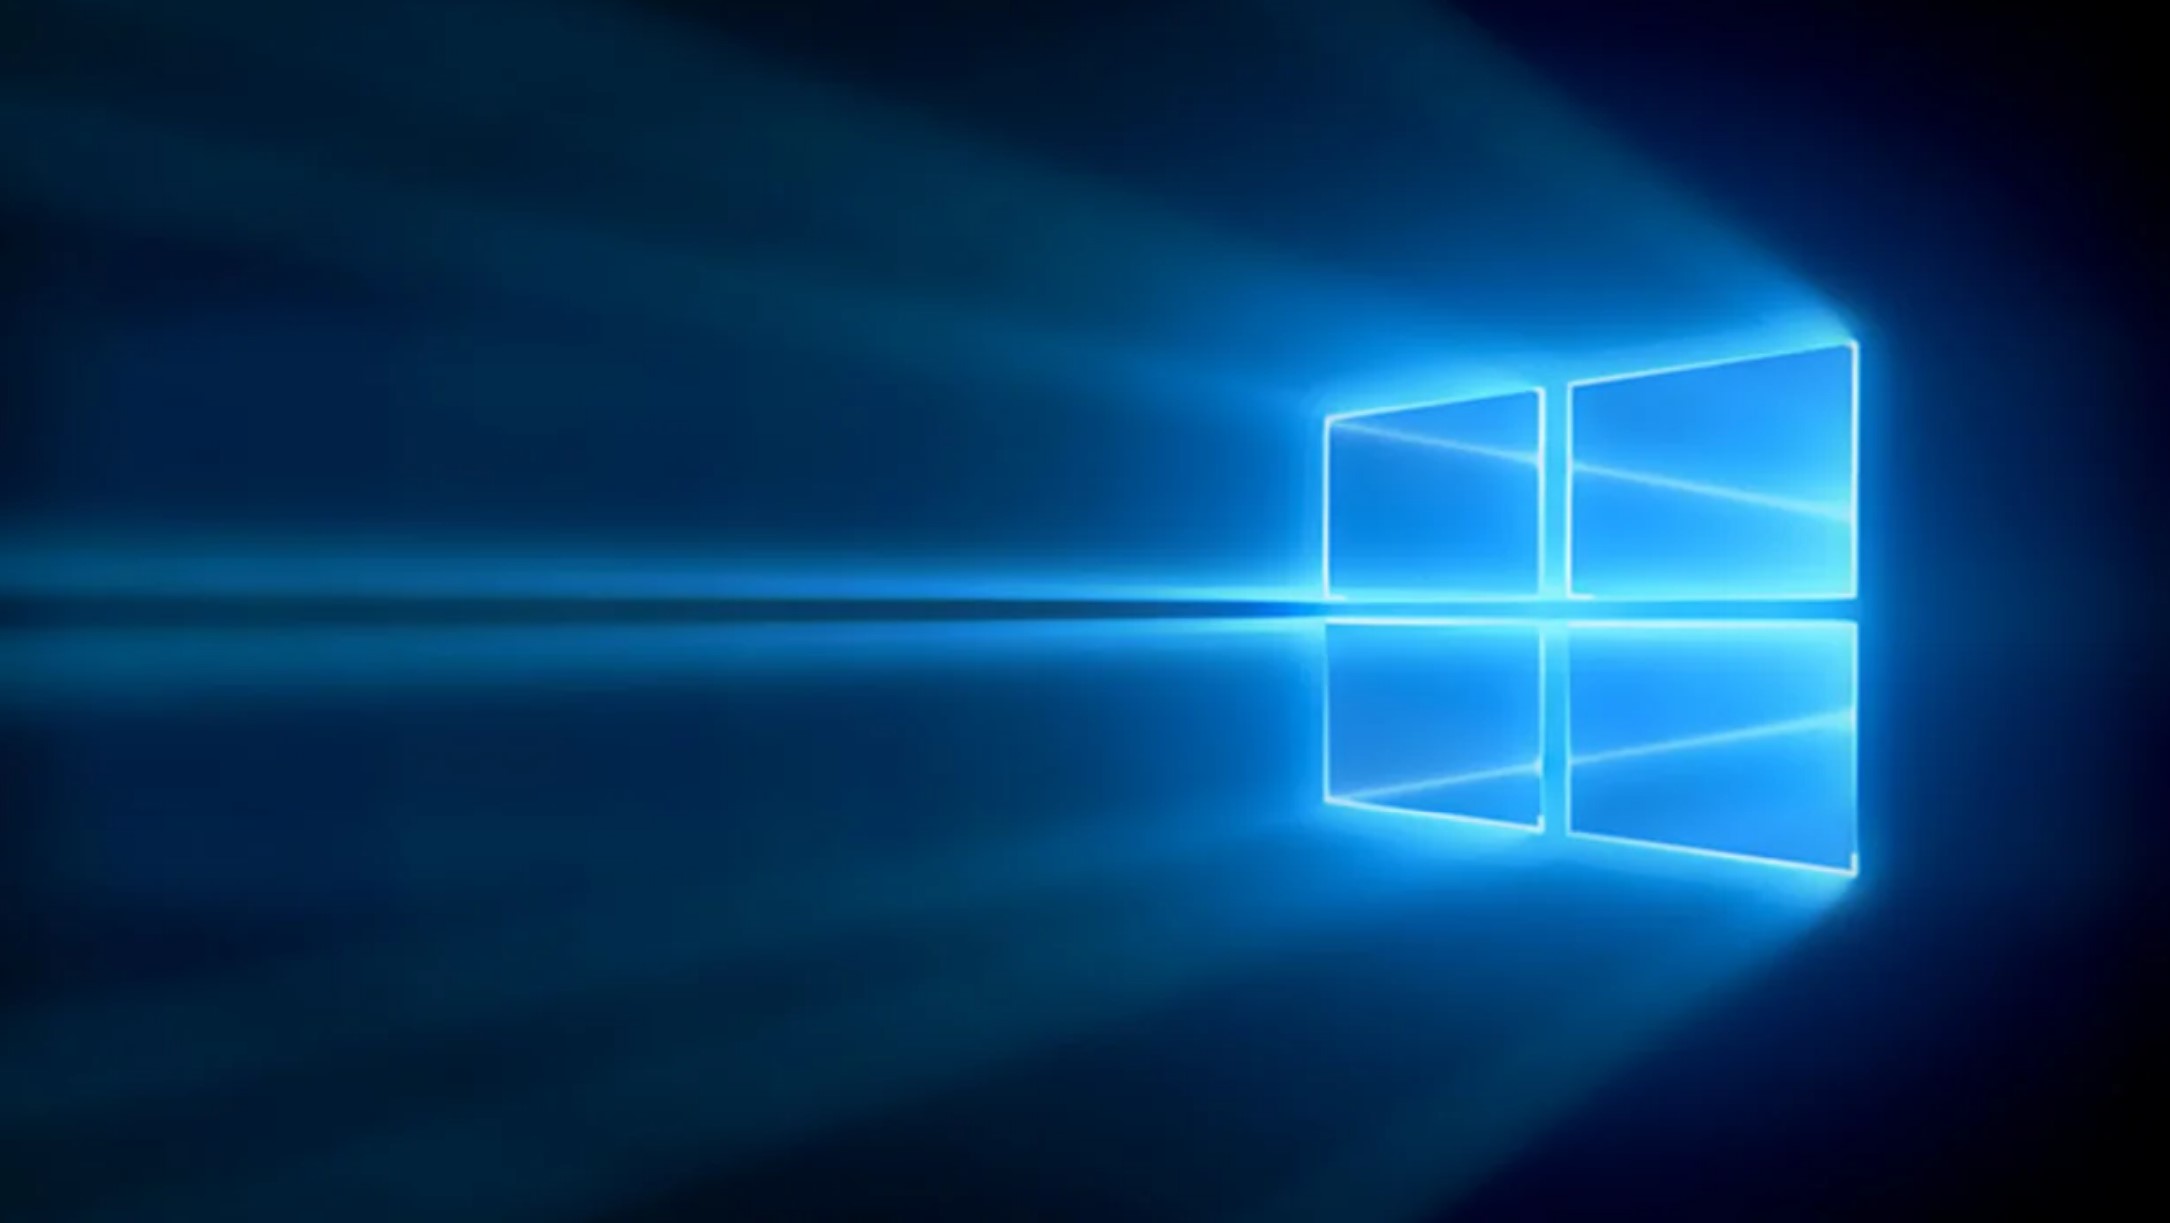 How to clean install Windows 10/11 (guide)